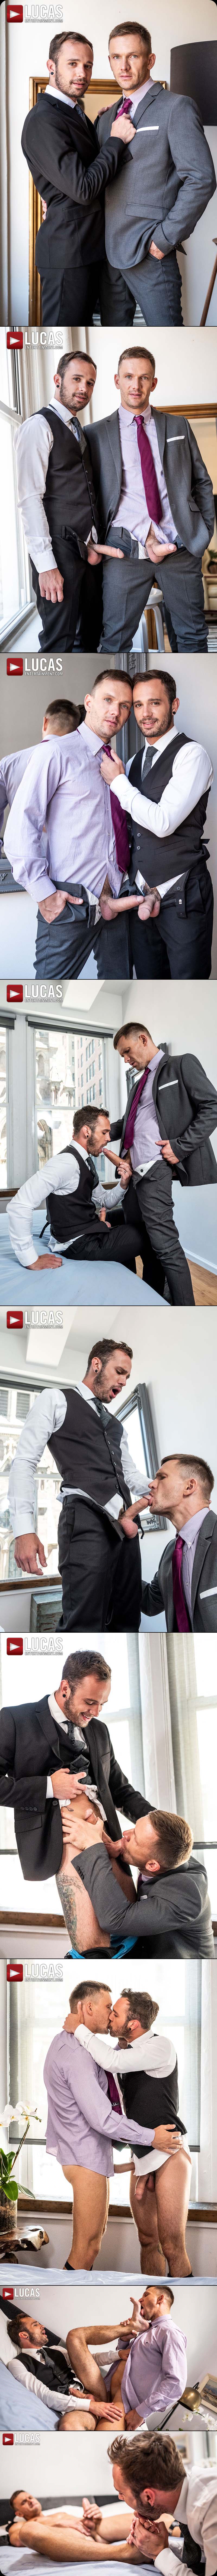 Gentlemen 28: Executive Authority, Scene Three (Drake Rogers Rides Andrey Vic’s Fat Cock) at LucasEntertainment